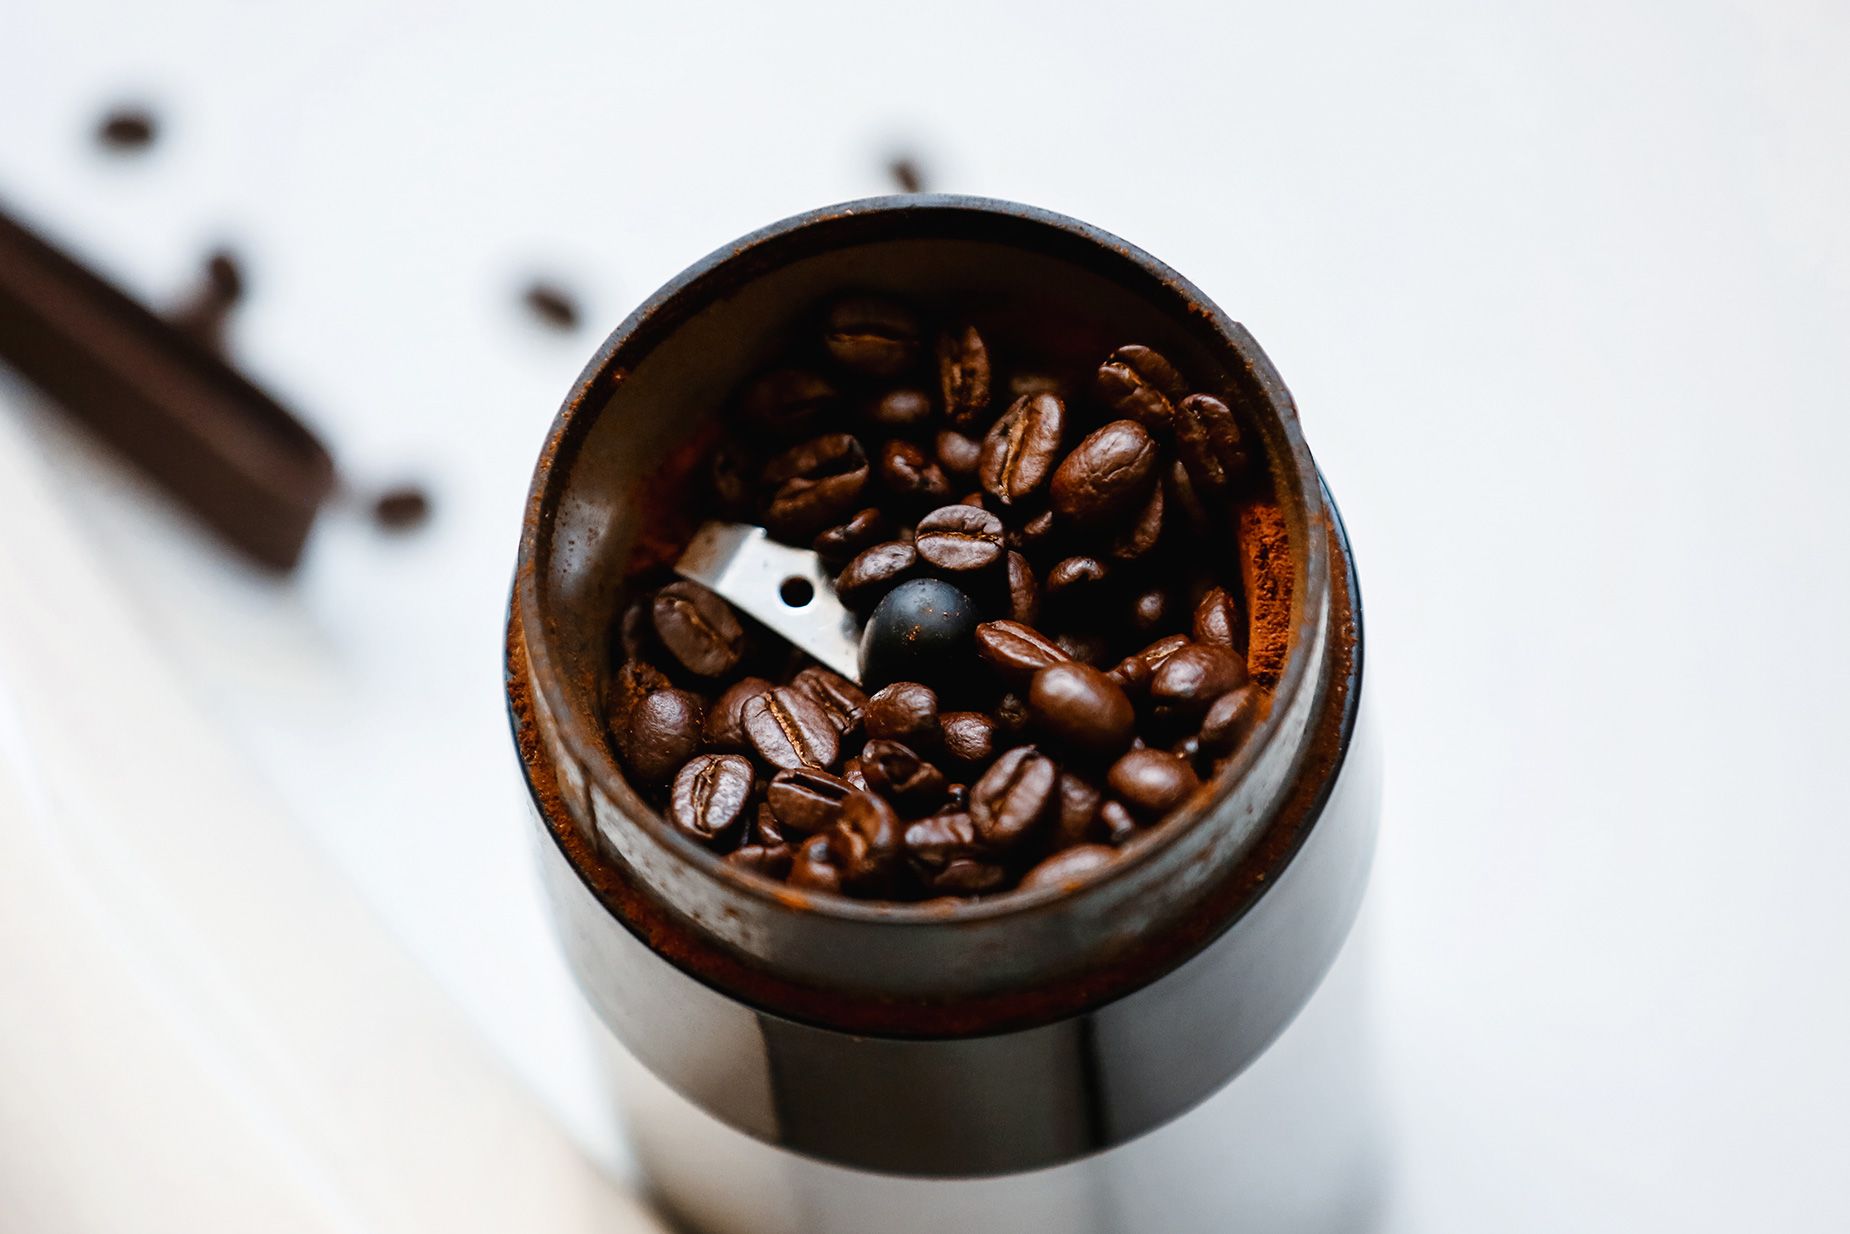 The secret to a perfect cup of coffee, according to science